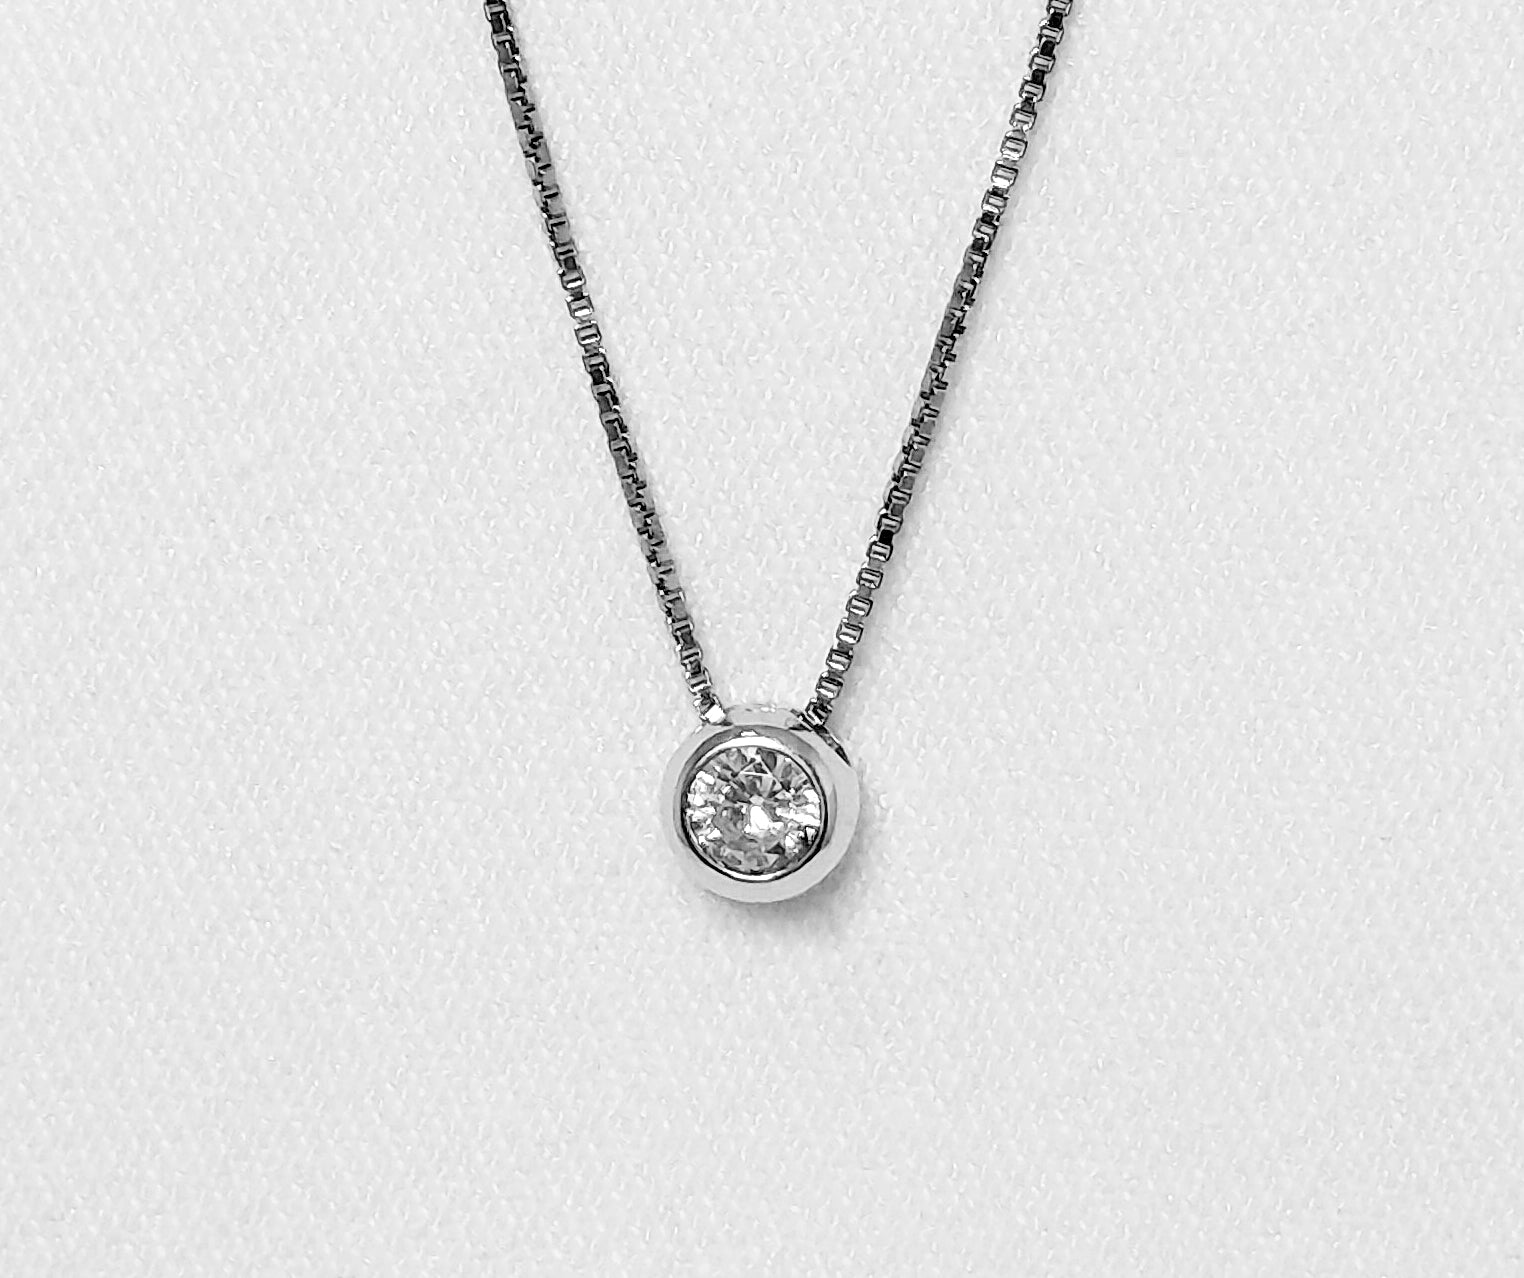 sterling silver necklace with cubic zirconia stone.